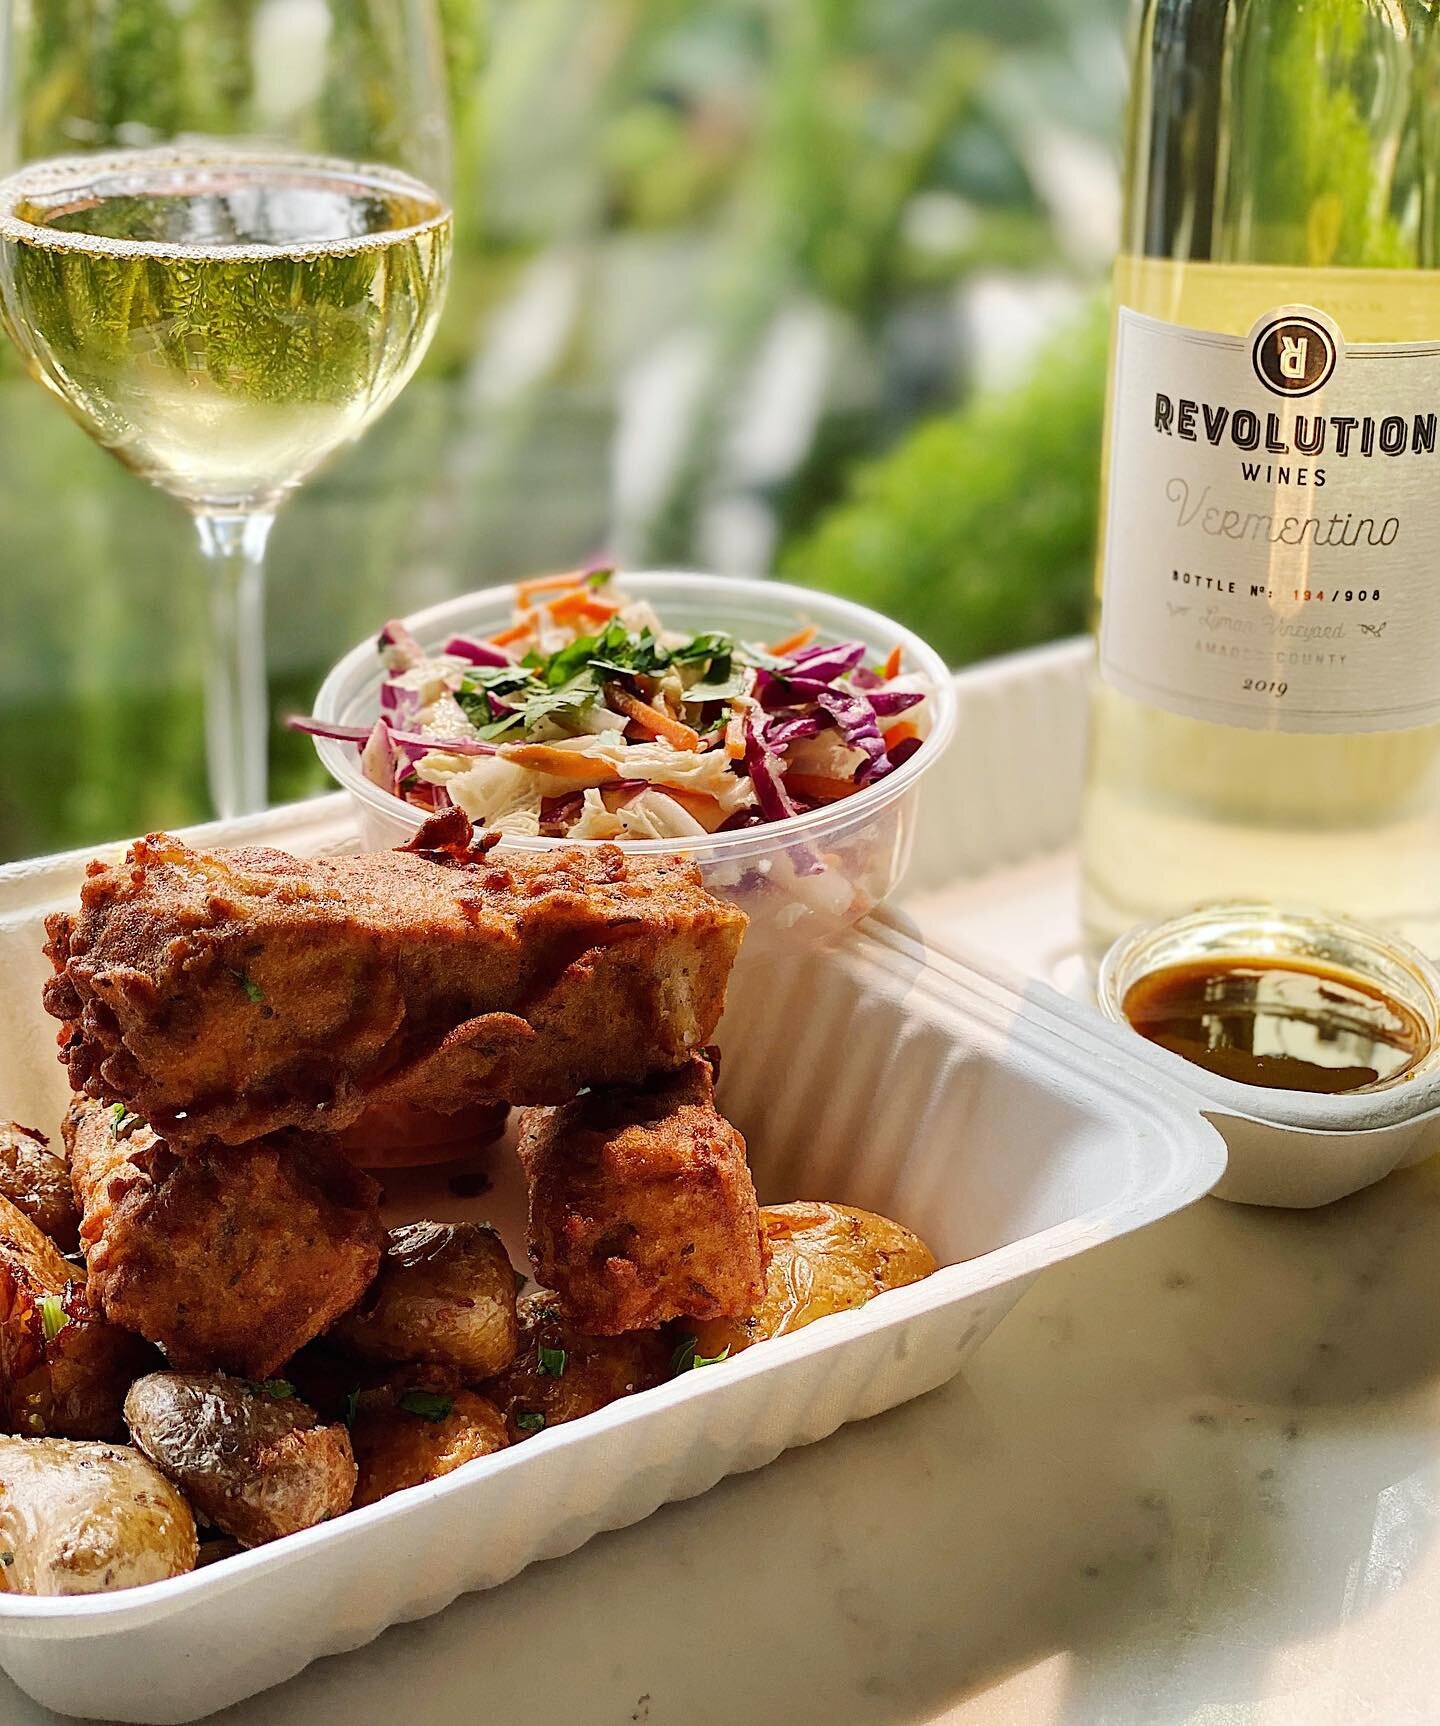 stay in, stay safe &amp; pick up NEW Southern Fried NOT Chicken + wine to cheer yourself up ✨ this is what pandemic-fire-weekends look like #surviving2020
.
vegan AND gluten free marinated &amp; fried tofu, fingerling potatoes, maple sriracha glaze, 